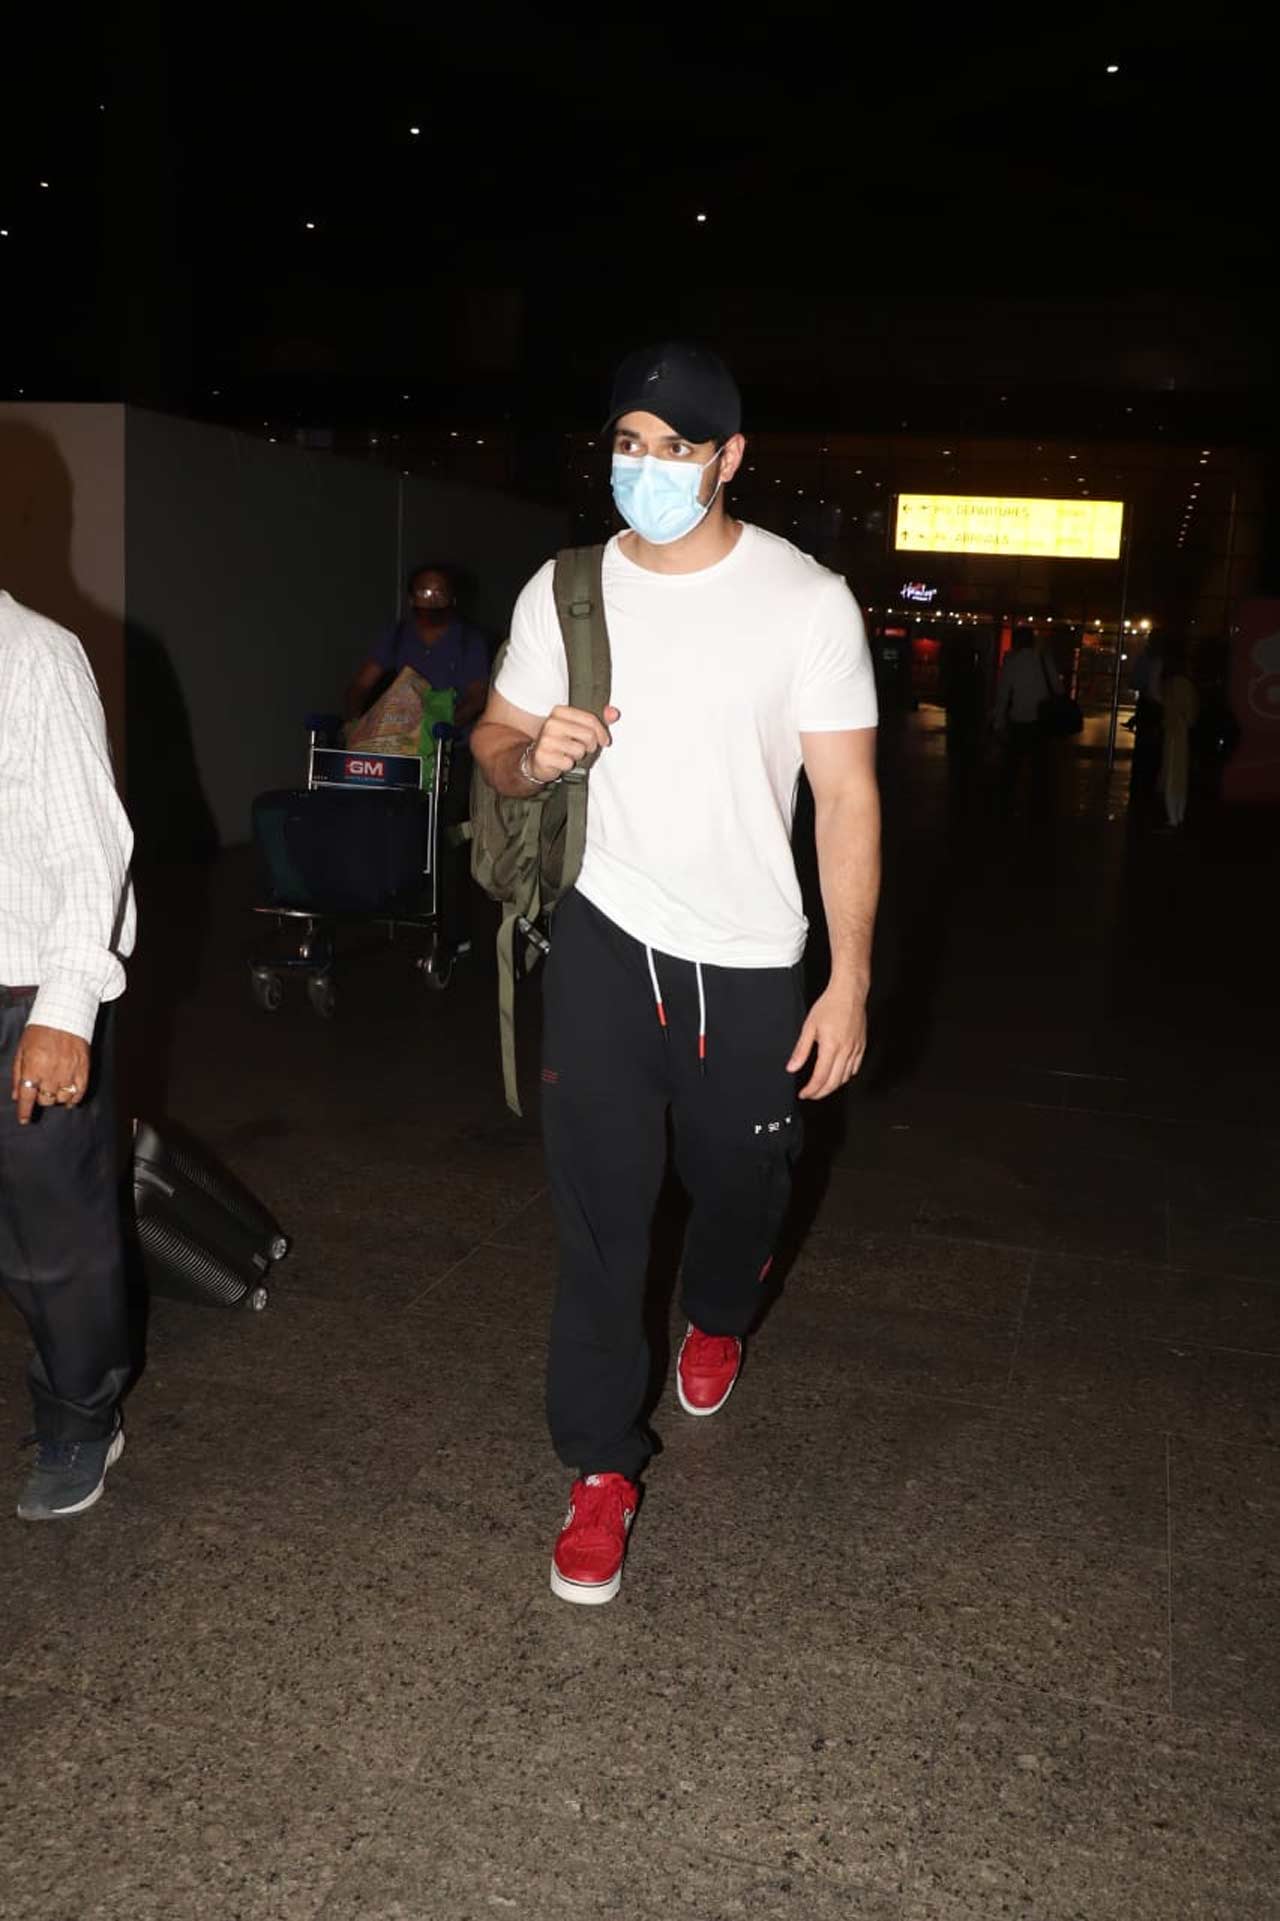 Sooraj Pancholi, the 'Its Time To Dance' actor, was also clicked at the airport.